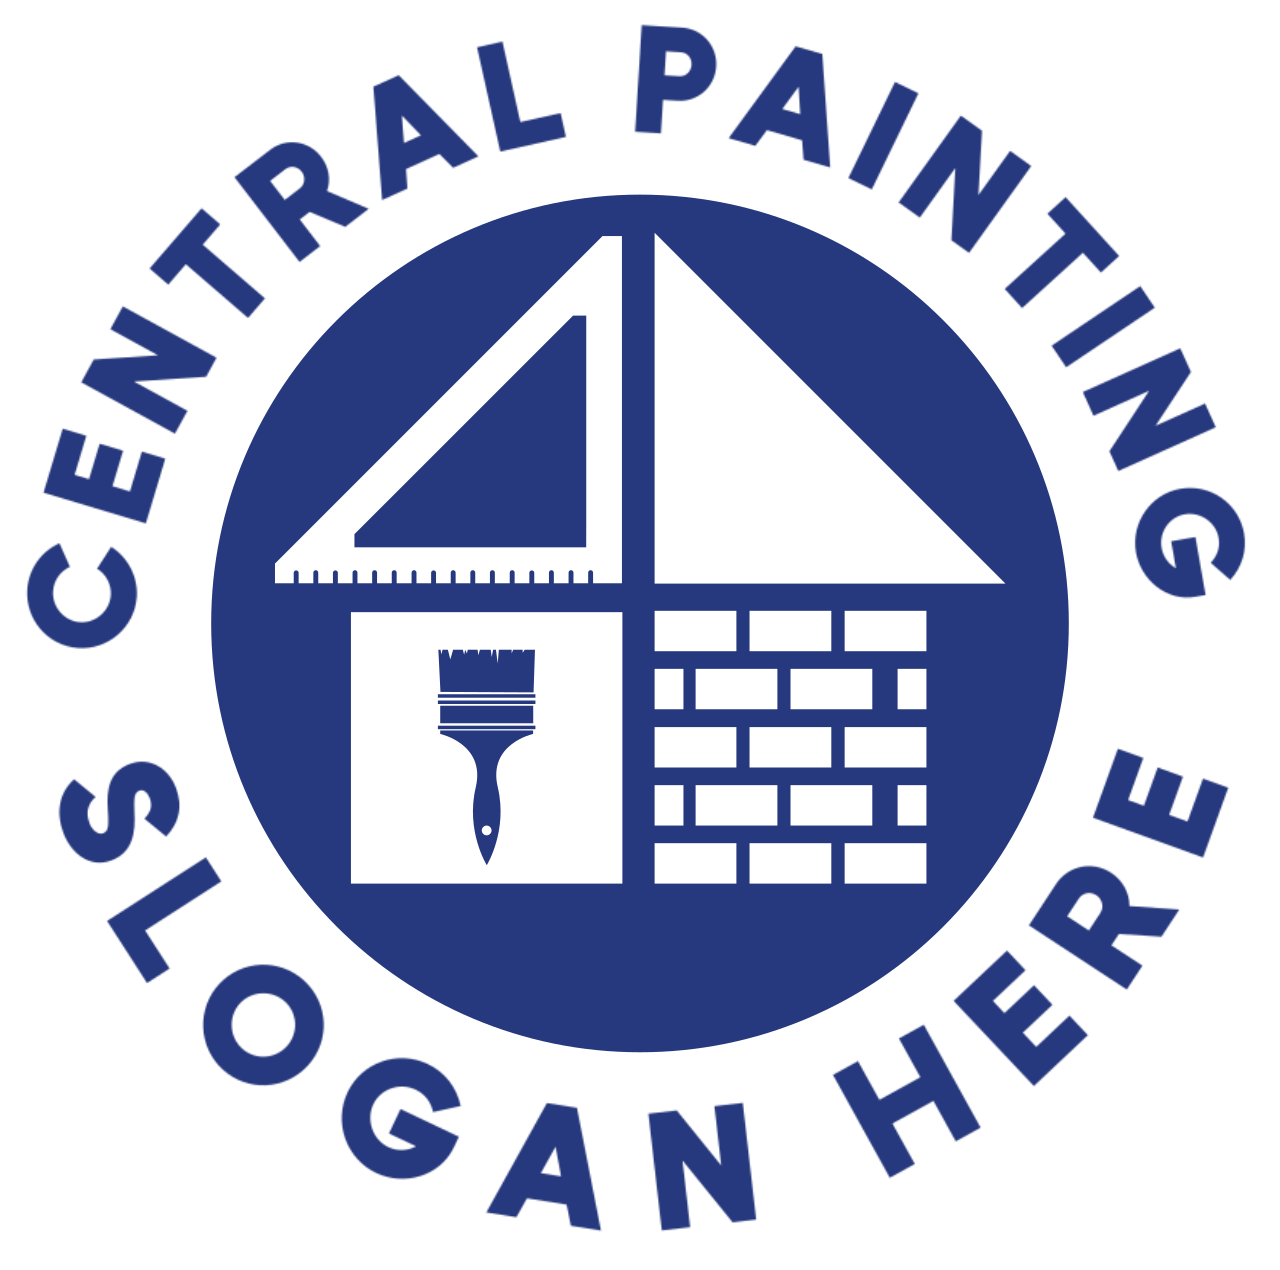 Central painting 's web page